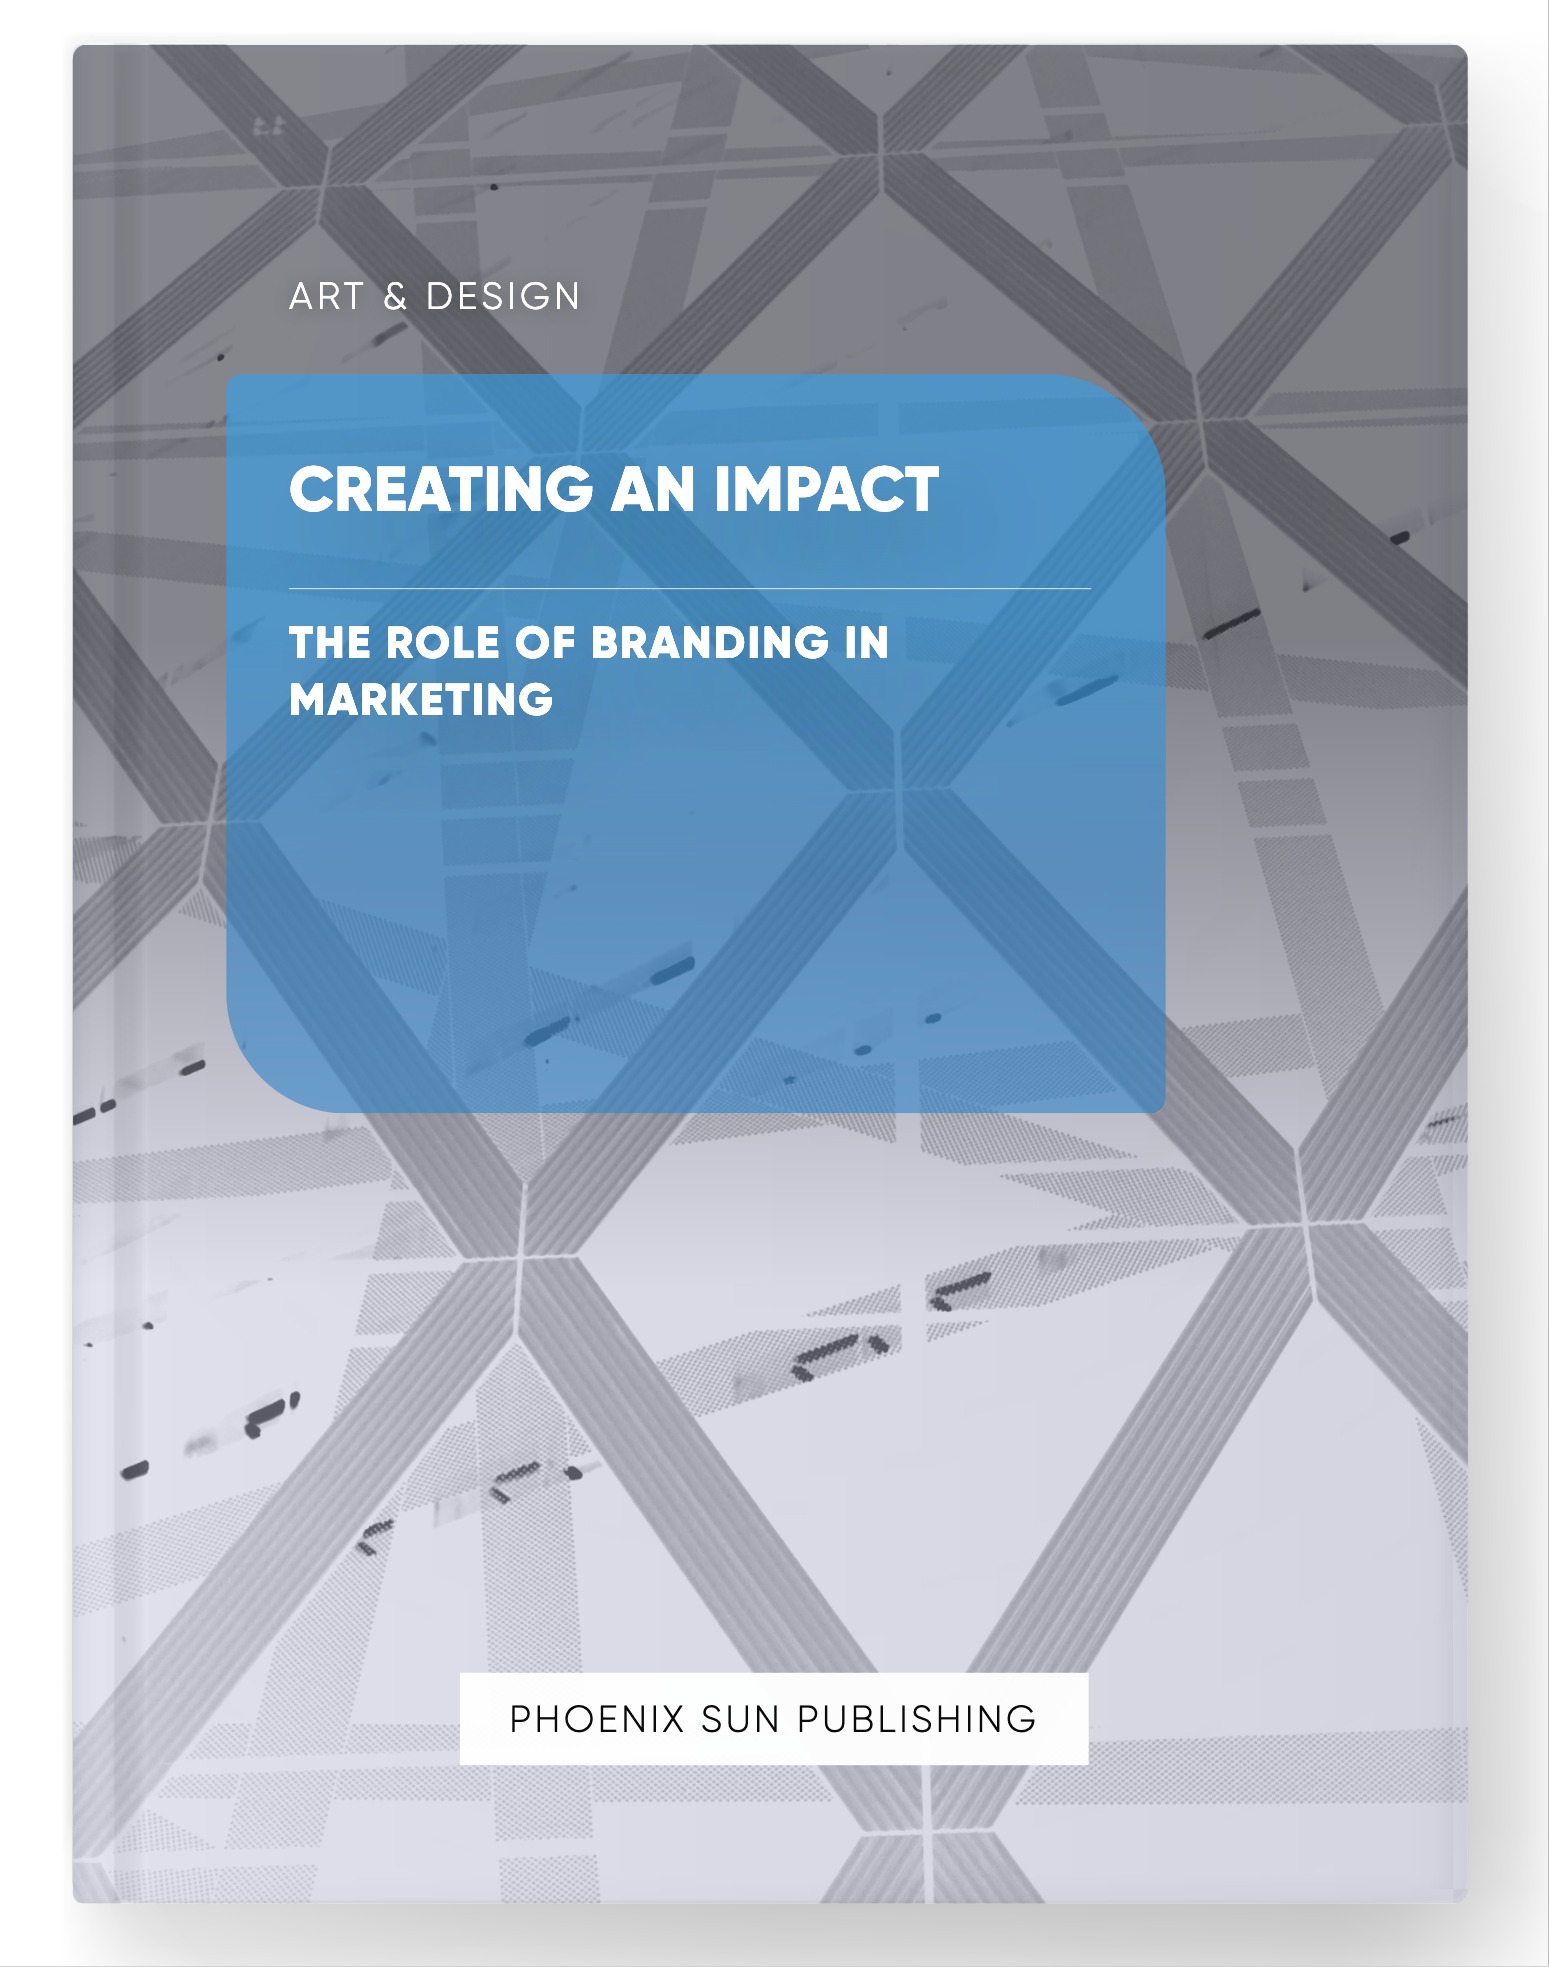 Creating an Impact – The Role of Branding in Marketing